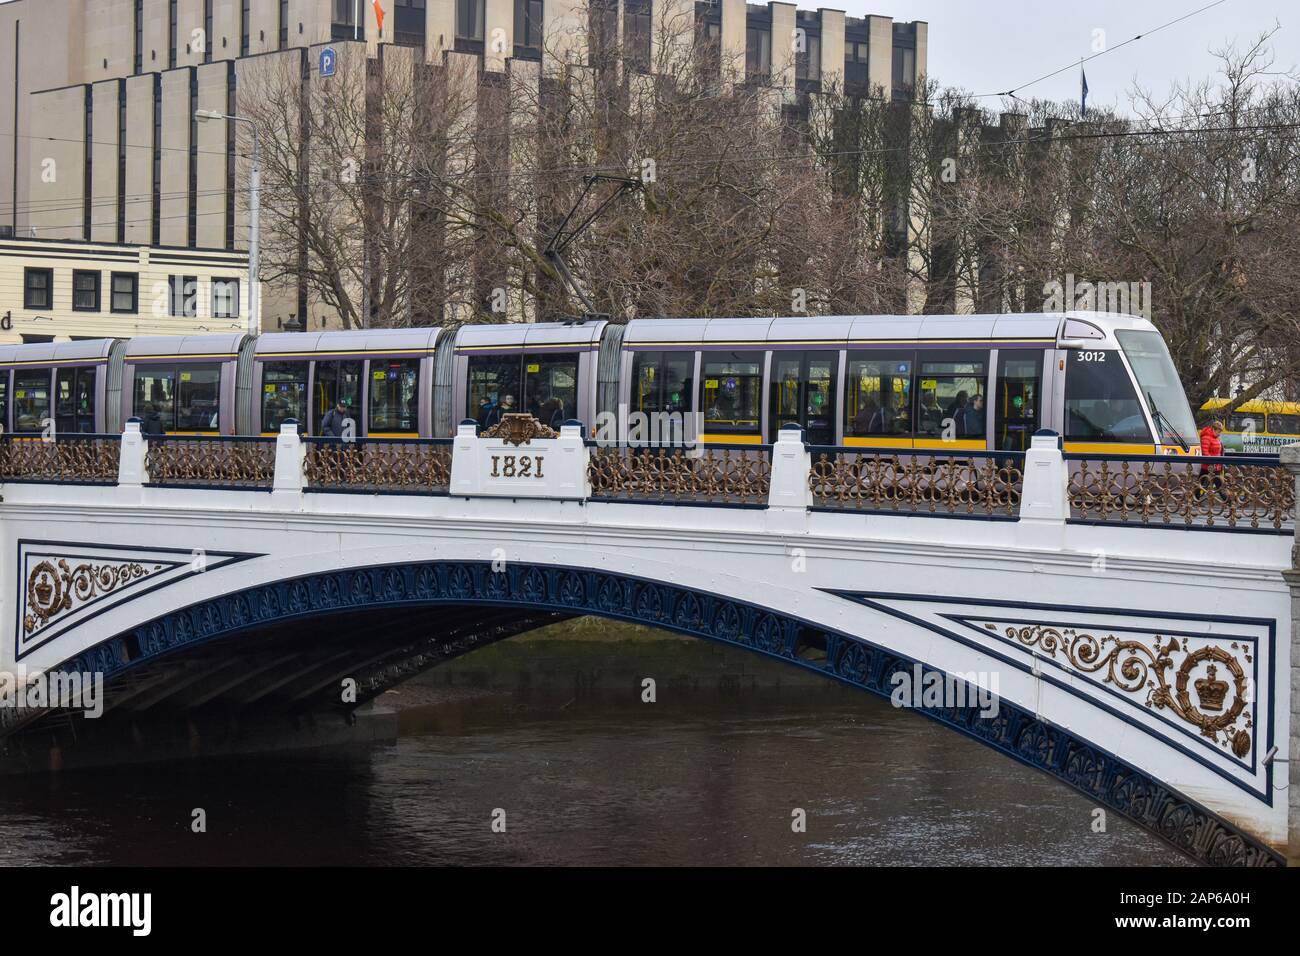 Dublin, Ireland - January 20, 2020: A Luas tram crossing the river liffey from the north side of Dublin to the south in dublin, ireland. Stock Photo